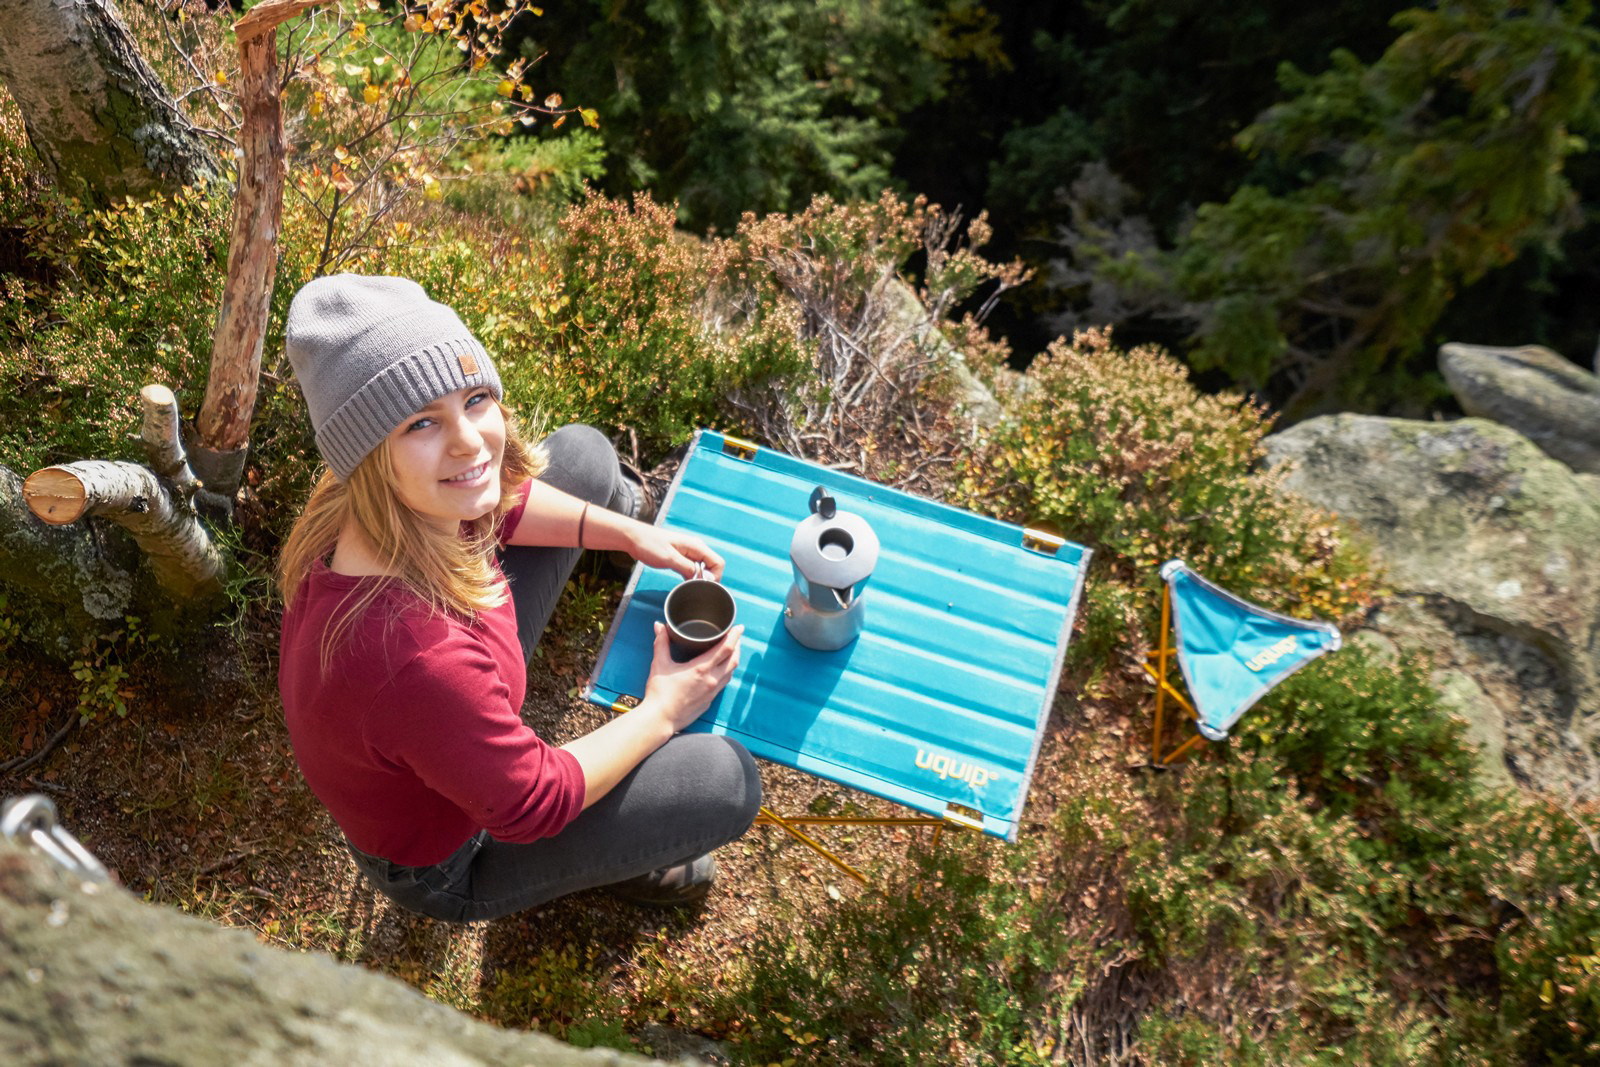 Collapsible furniture – Touring, camping, peace and quiet